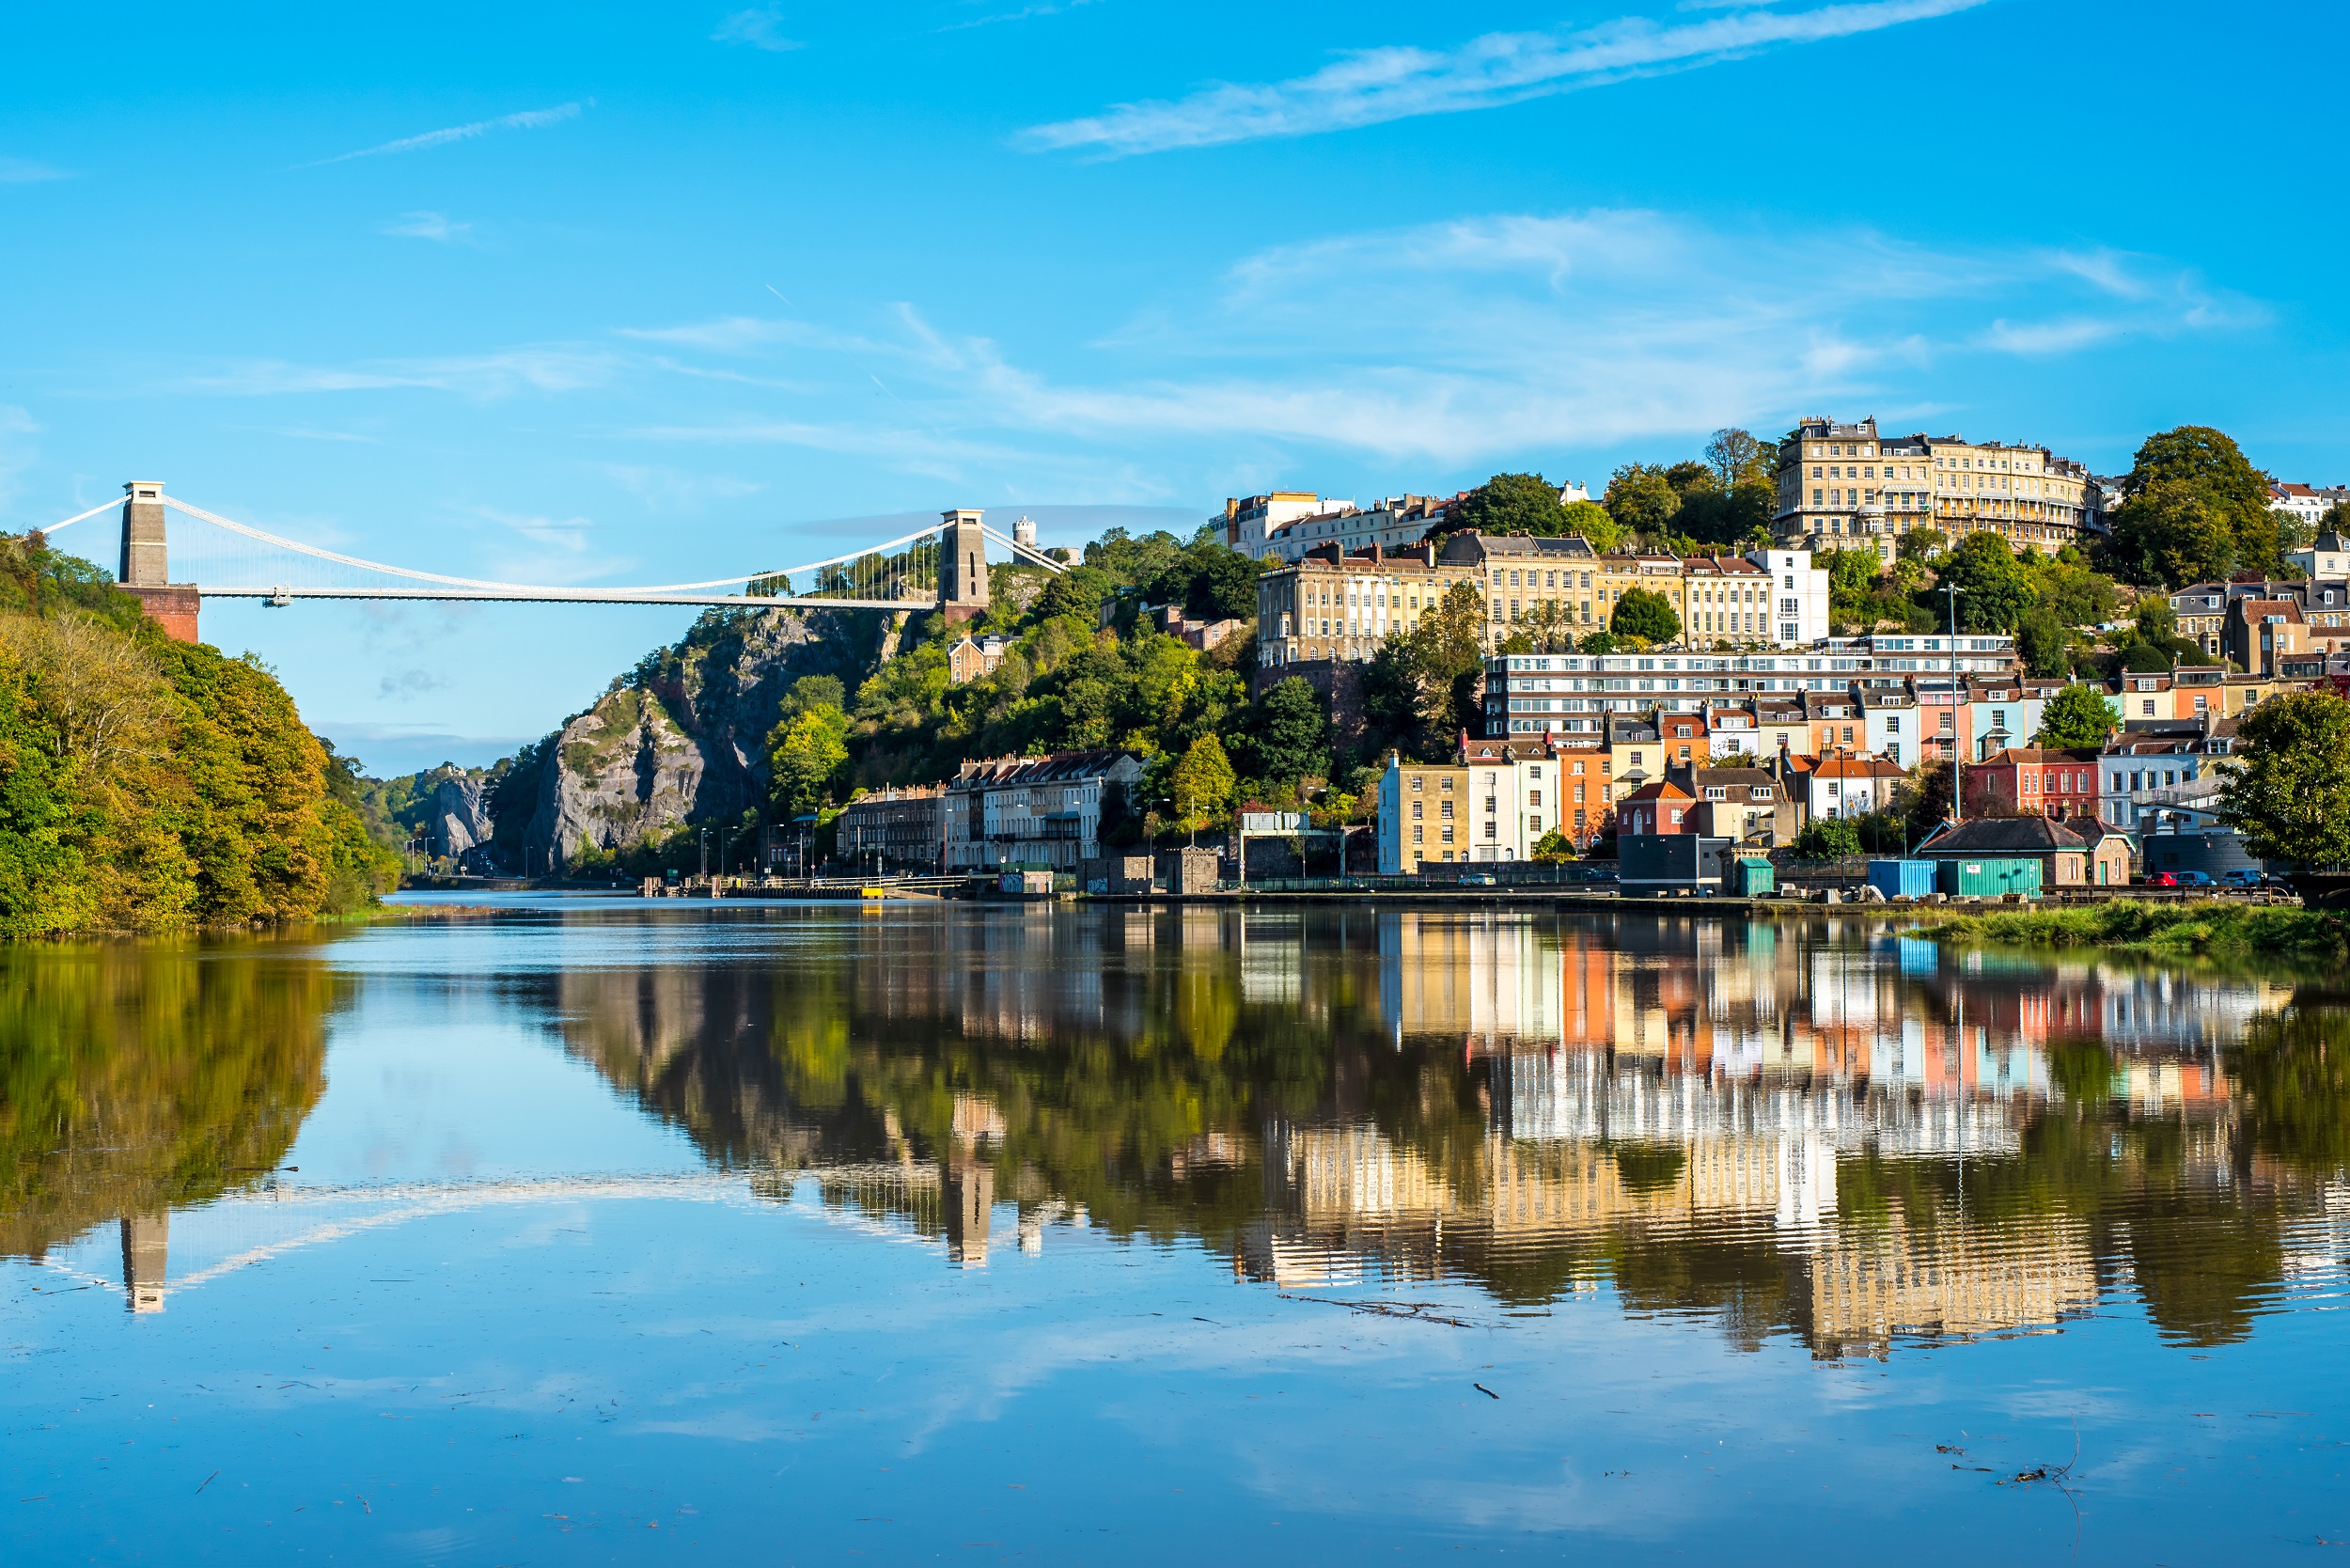 Commercial series – Mining in Bristol